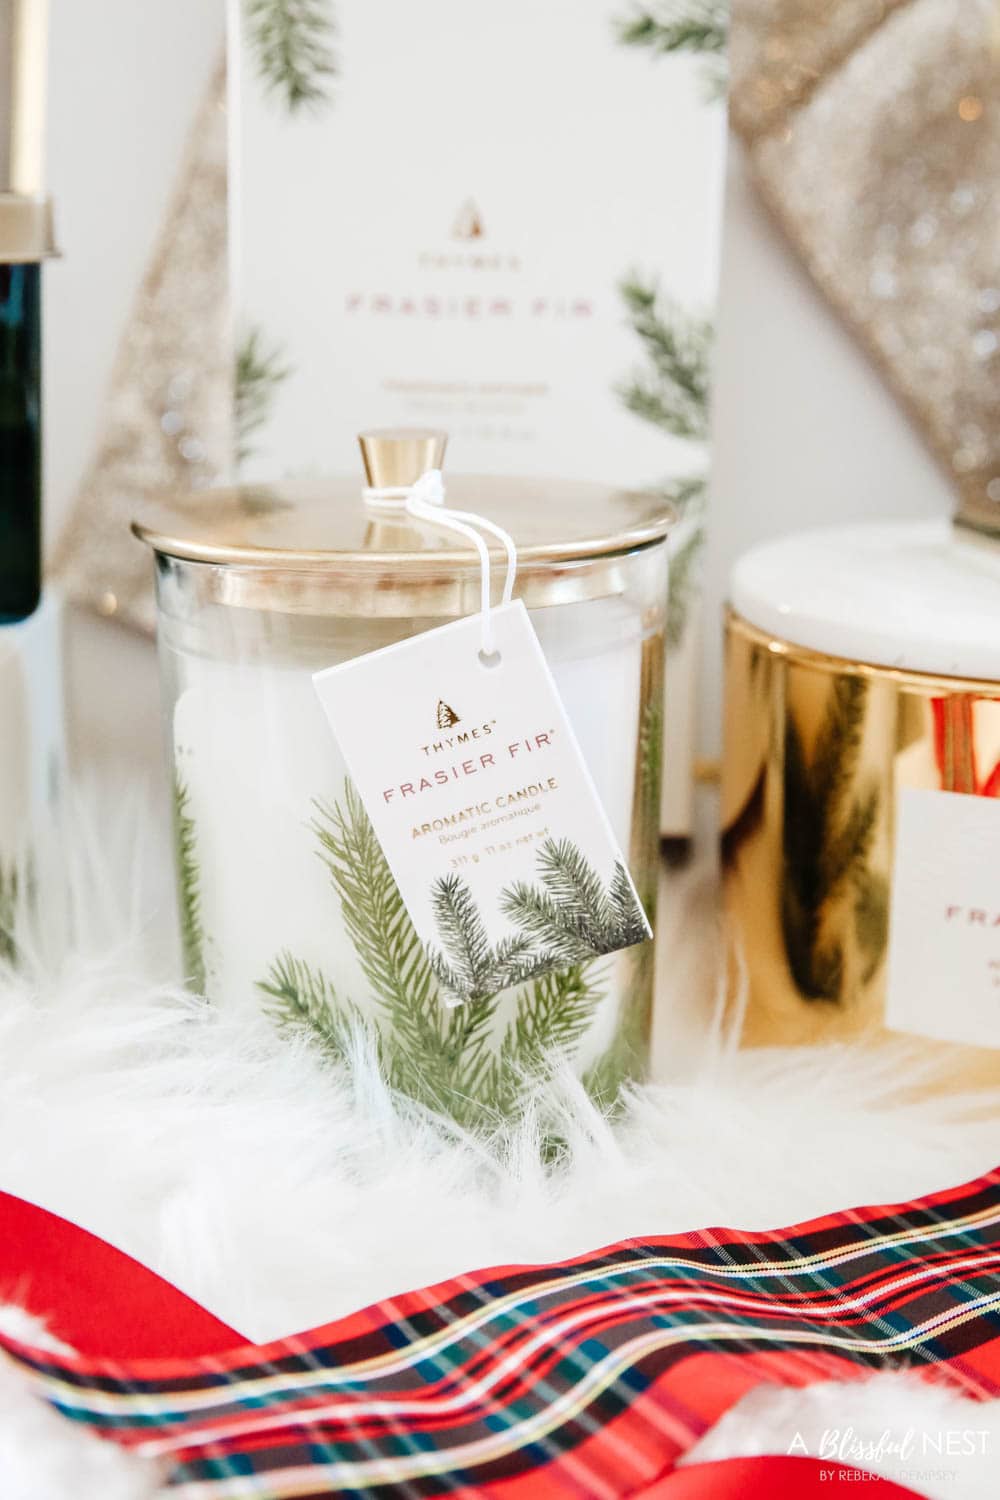 Candles and diffusers from Thymes under a Christmas tree.